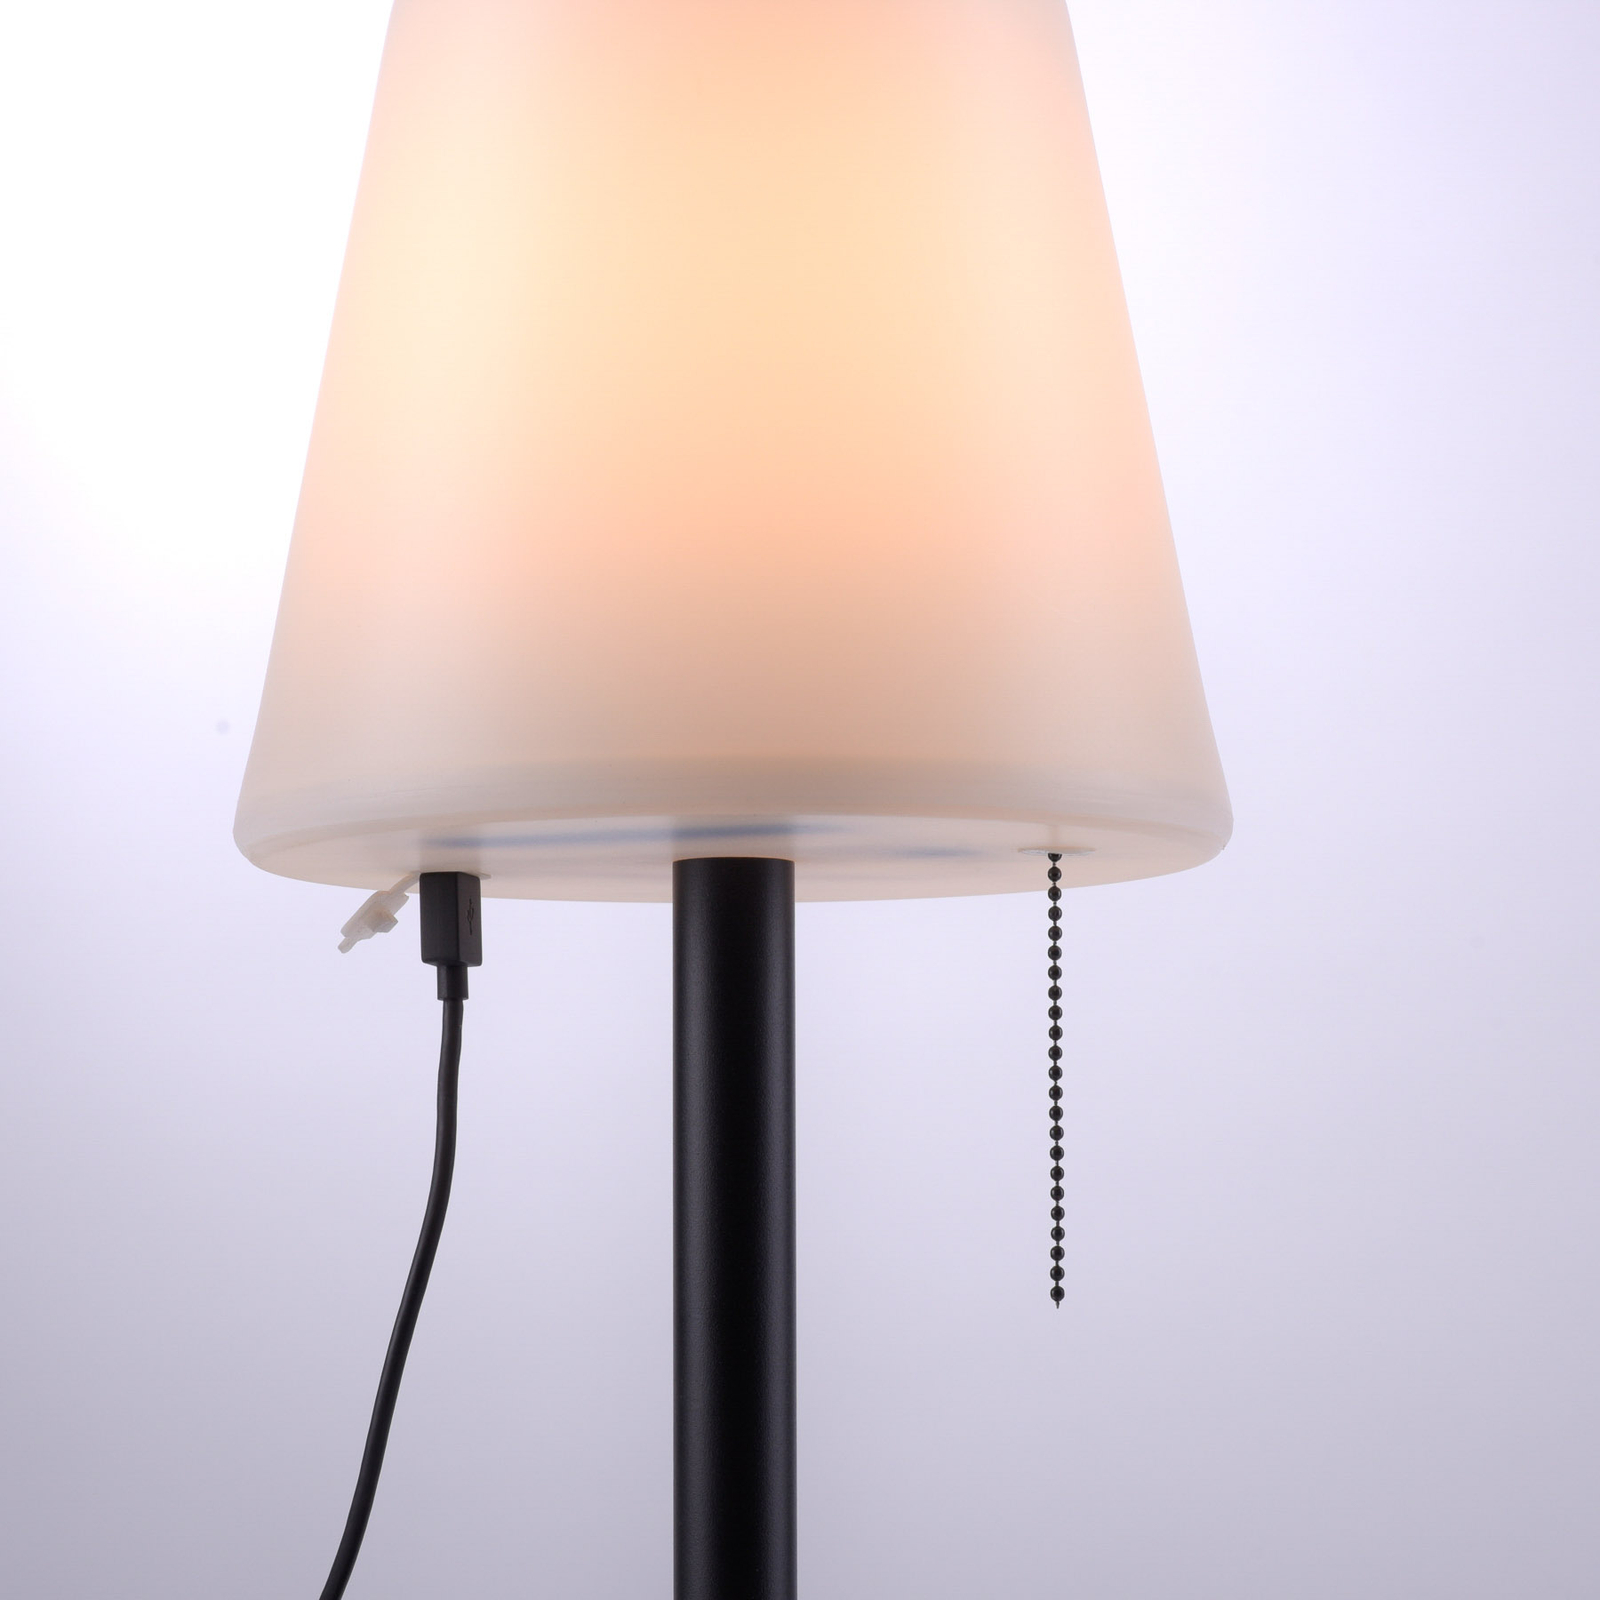 Keno LED table lamp, ground spike, pull switch